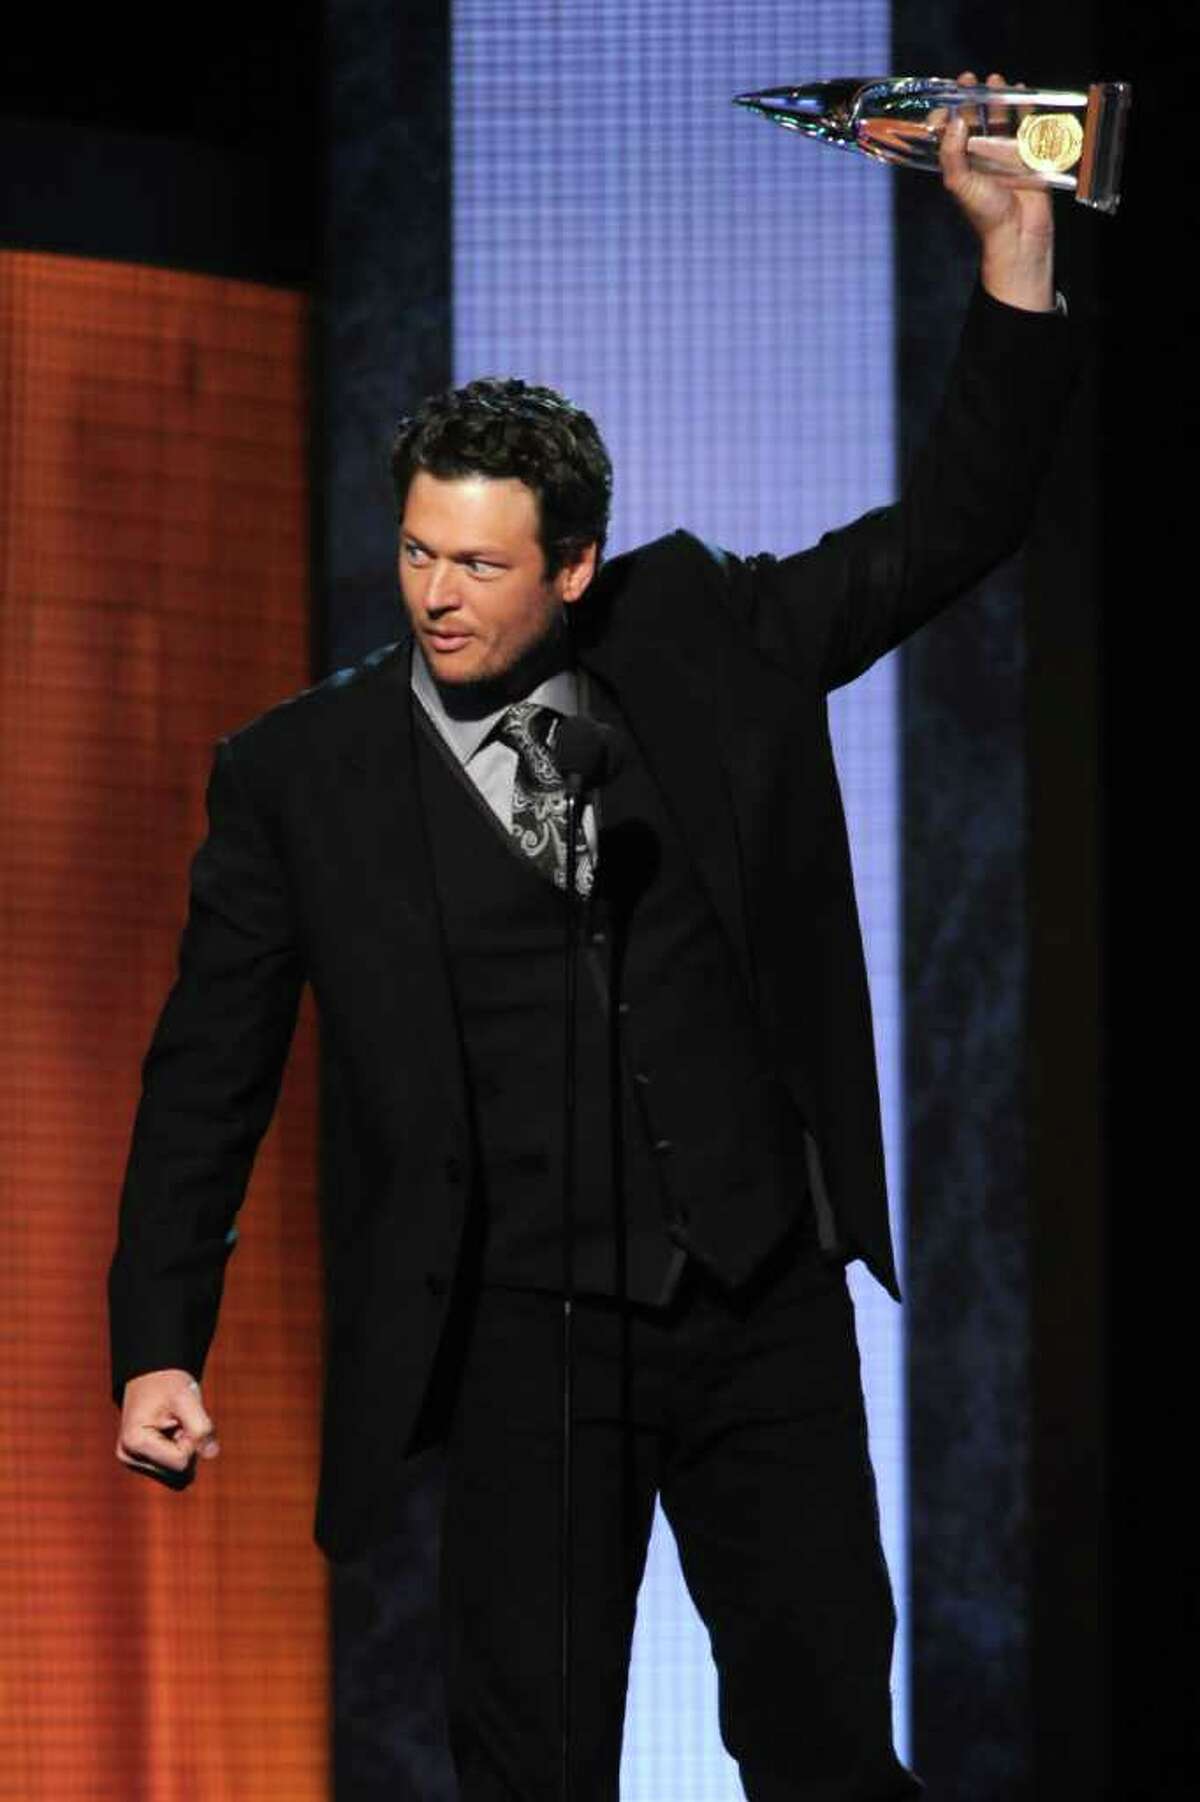 NASHVILLE, TN - NOVEMBER 10: Musician Blake Shelton accepts award for Male Vocalist of the Year at the 44th Annual CMA Awards at the Bridgestone Arena on November 10, 2010 in Nashville, Tennessee. (Photo by Rick Diamond/Getty Images) *** Local Caption *** Blake Shelton